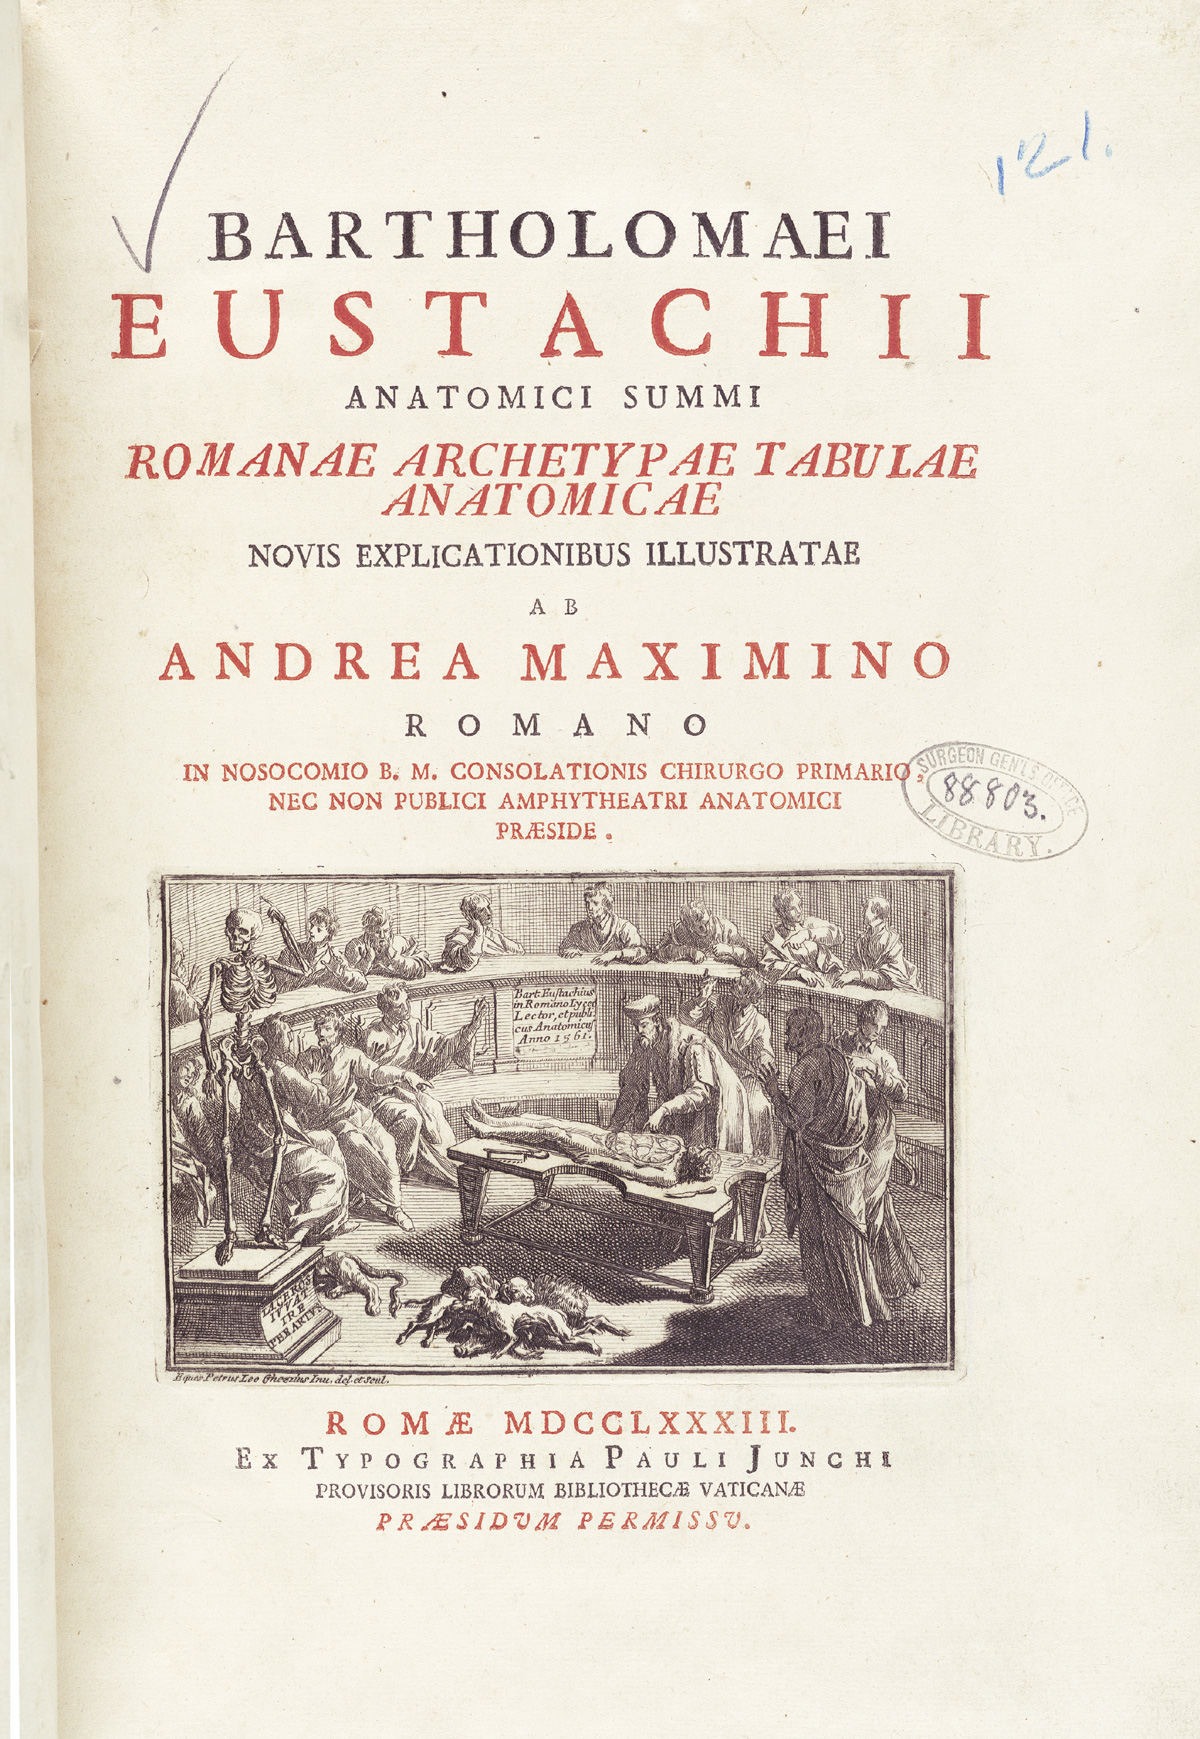 Typeset title page of Bartholomeo Eustachi’s Tabulae anatomicae in red and black ink, with a copperplate engraving in the bottom half of the page depicting a dissection scene in a theater with a physician crouched over a cadaver pointing to its open abdomen and students in the theater looking on, while to the left of the image is a fully articulated skeleton with its left arm raised as if gesticulating; from Bartholomeo Eustachi’s Tabulae anatomicae, NLM Call no.: WZ 260 E87t 1783.